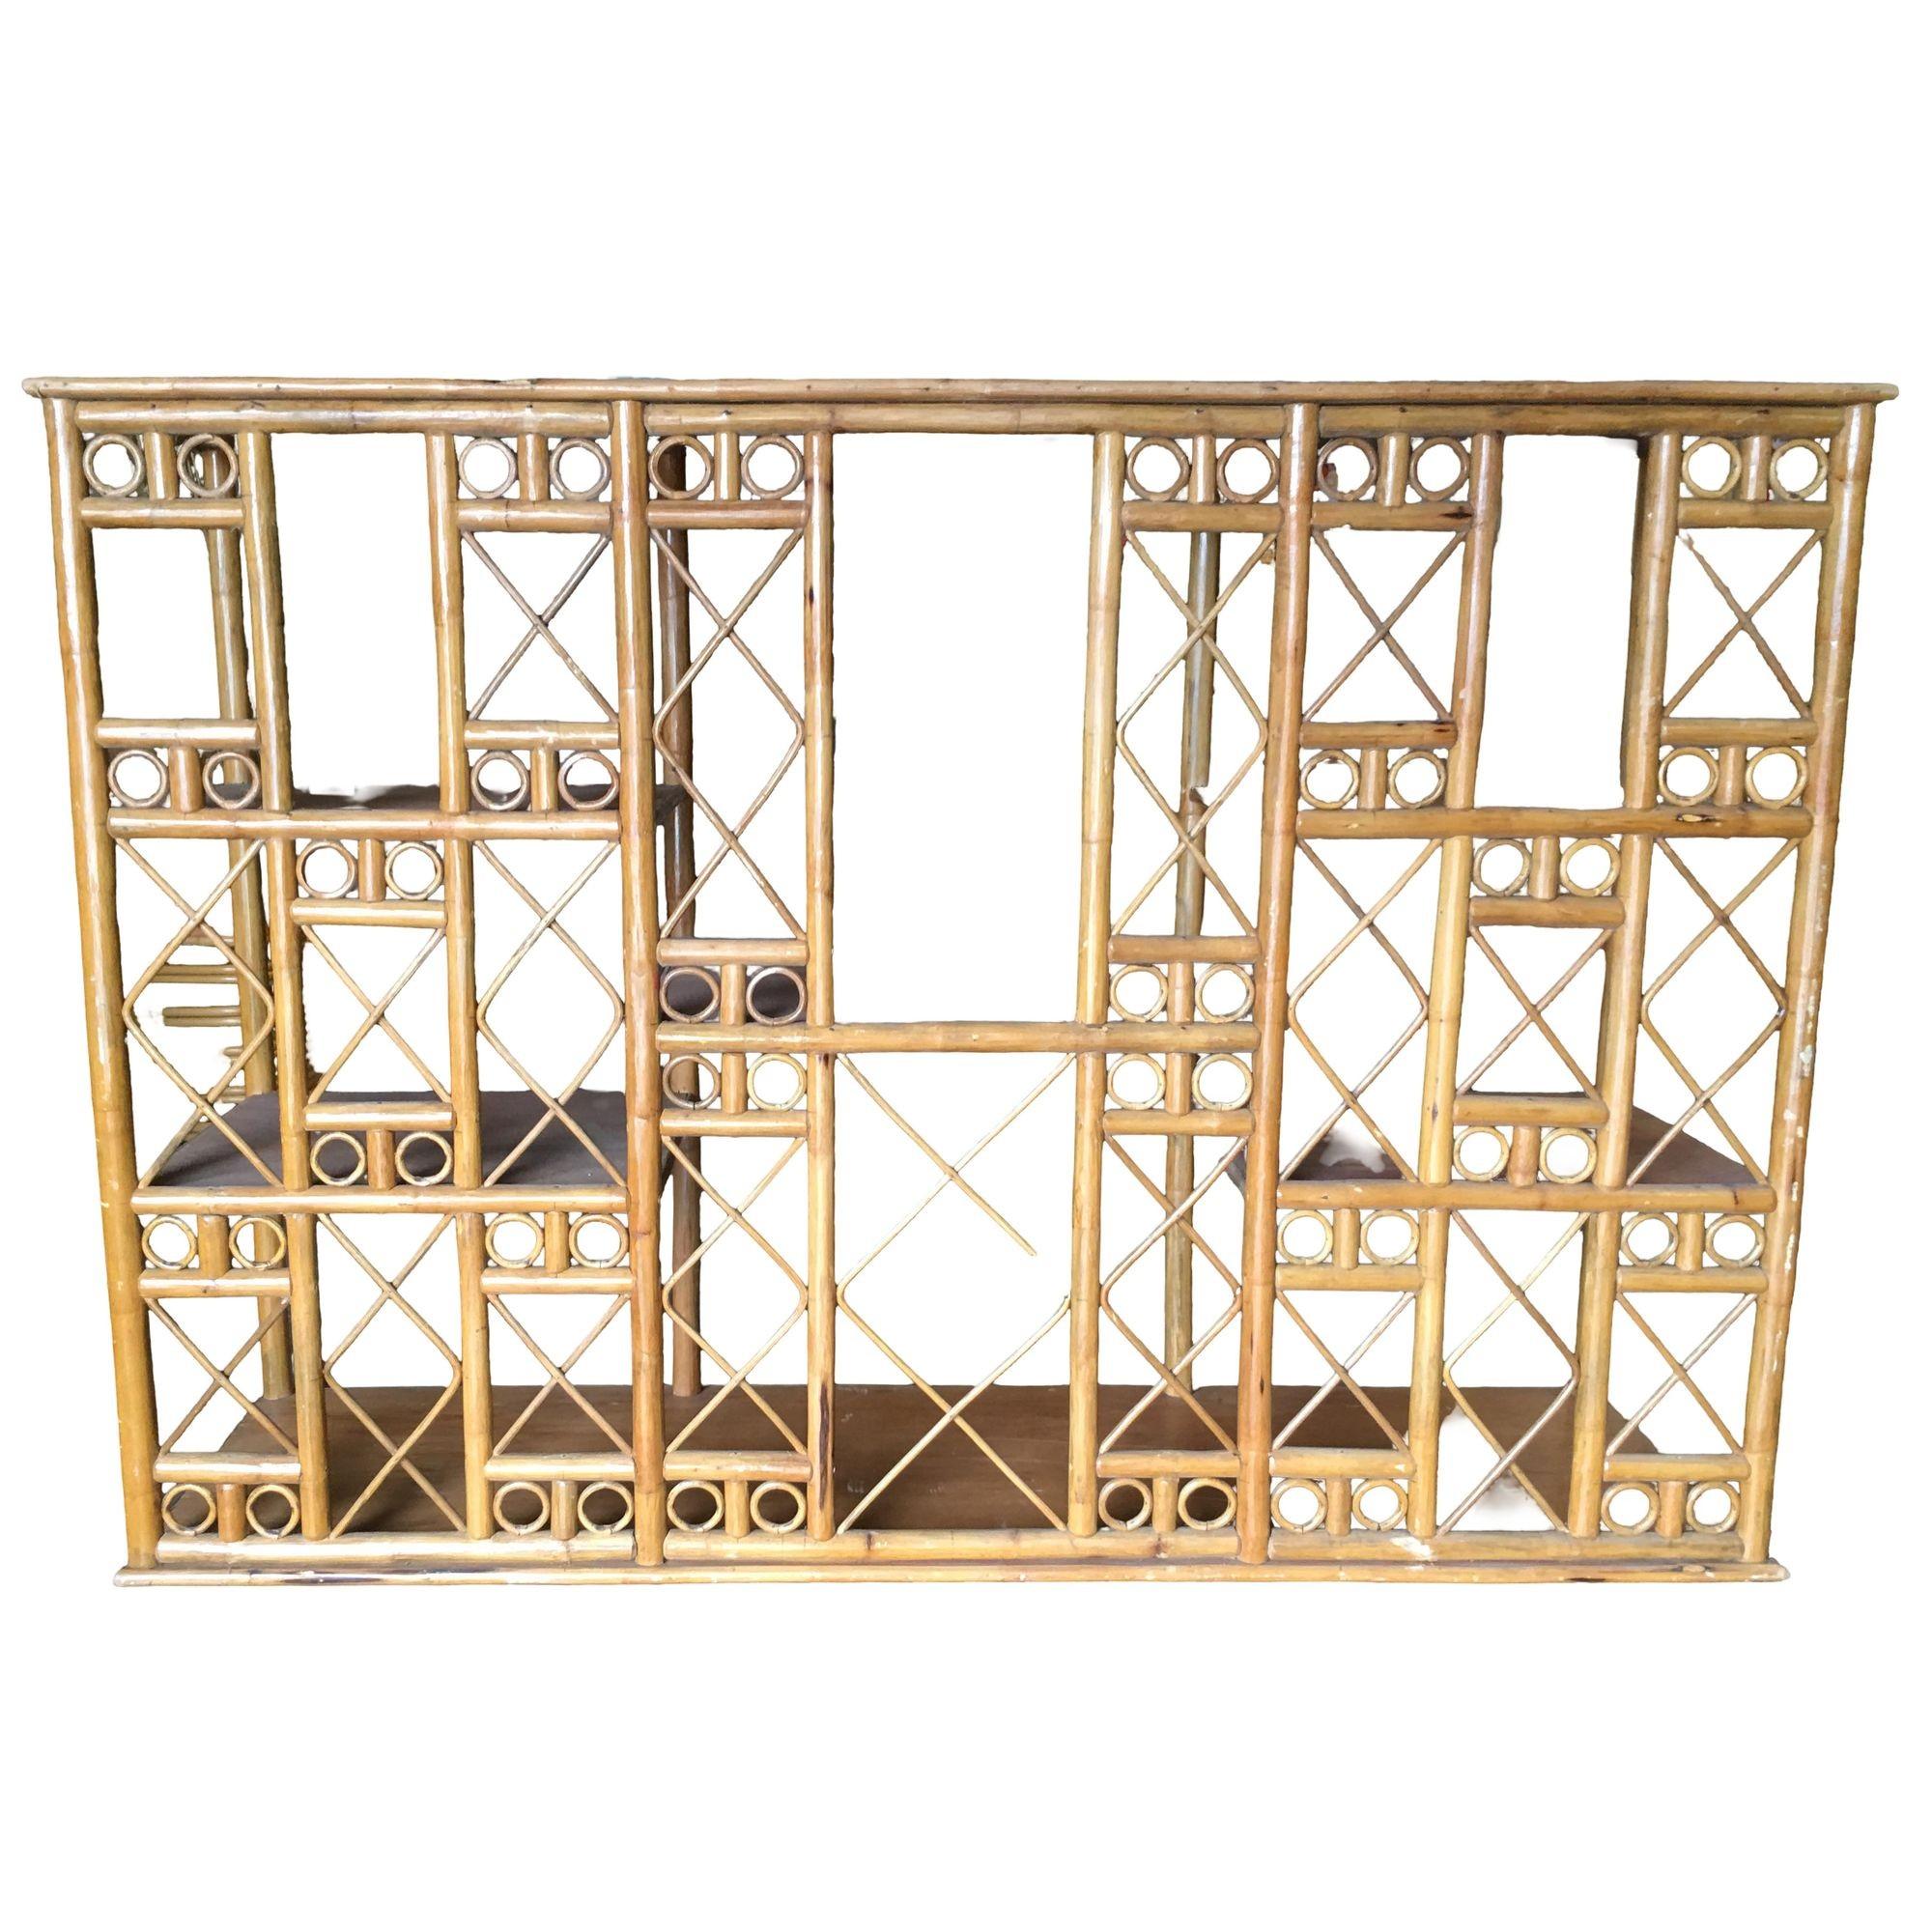 Restored Rattan Seven-Tier Tic-Tac-Toe Display Shelf Wall Etagere Unit In Excellent Condition For Sale In Van Nuys, CA